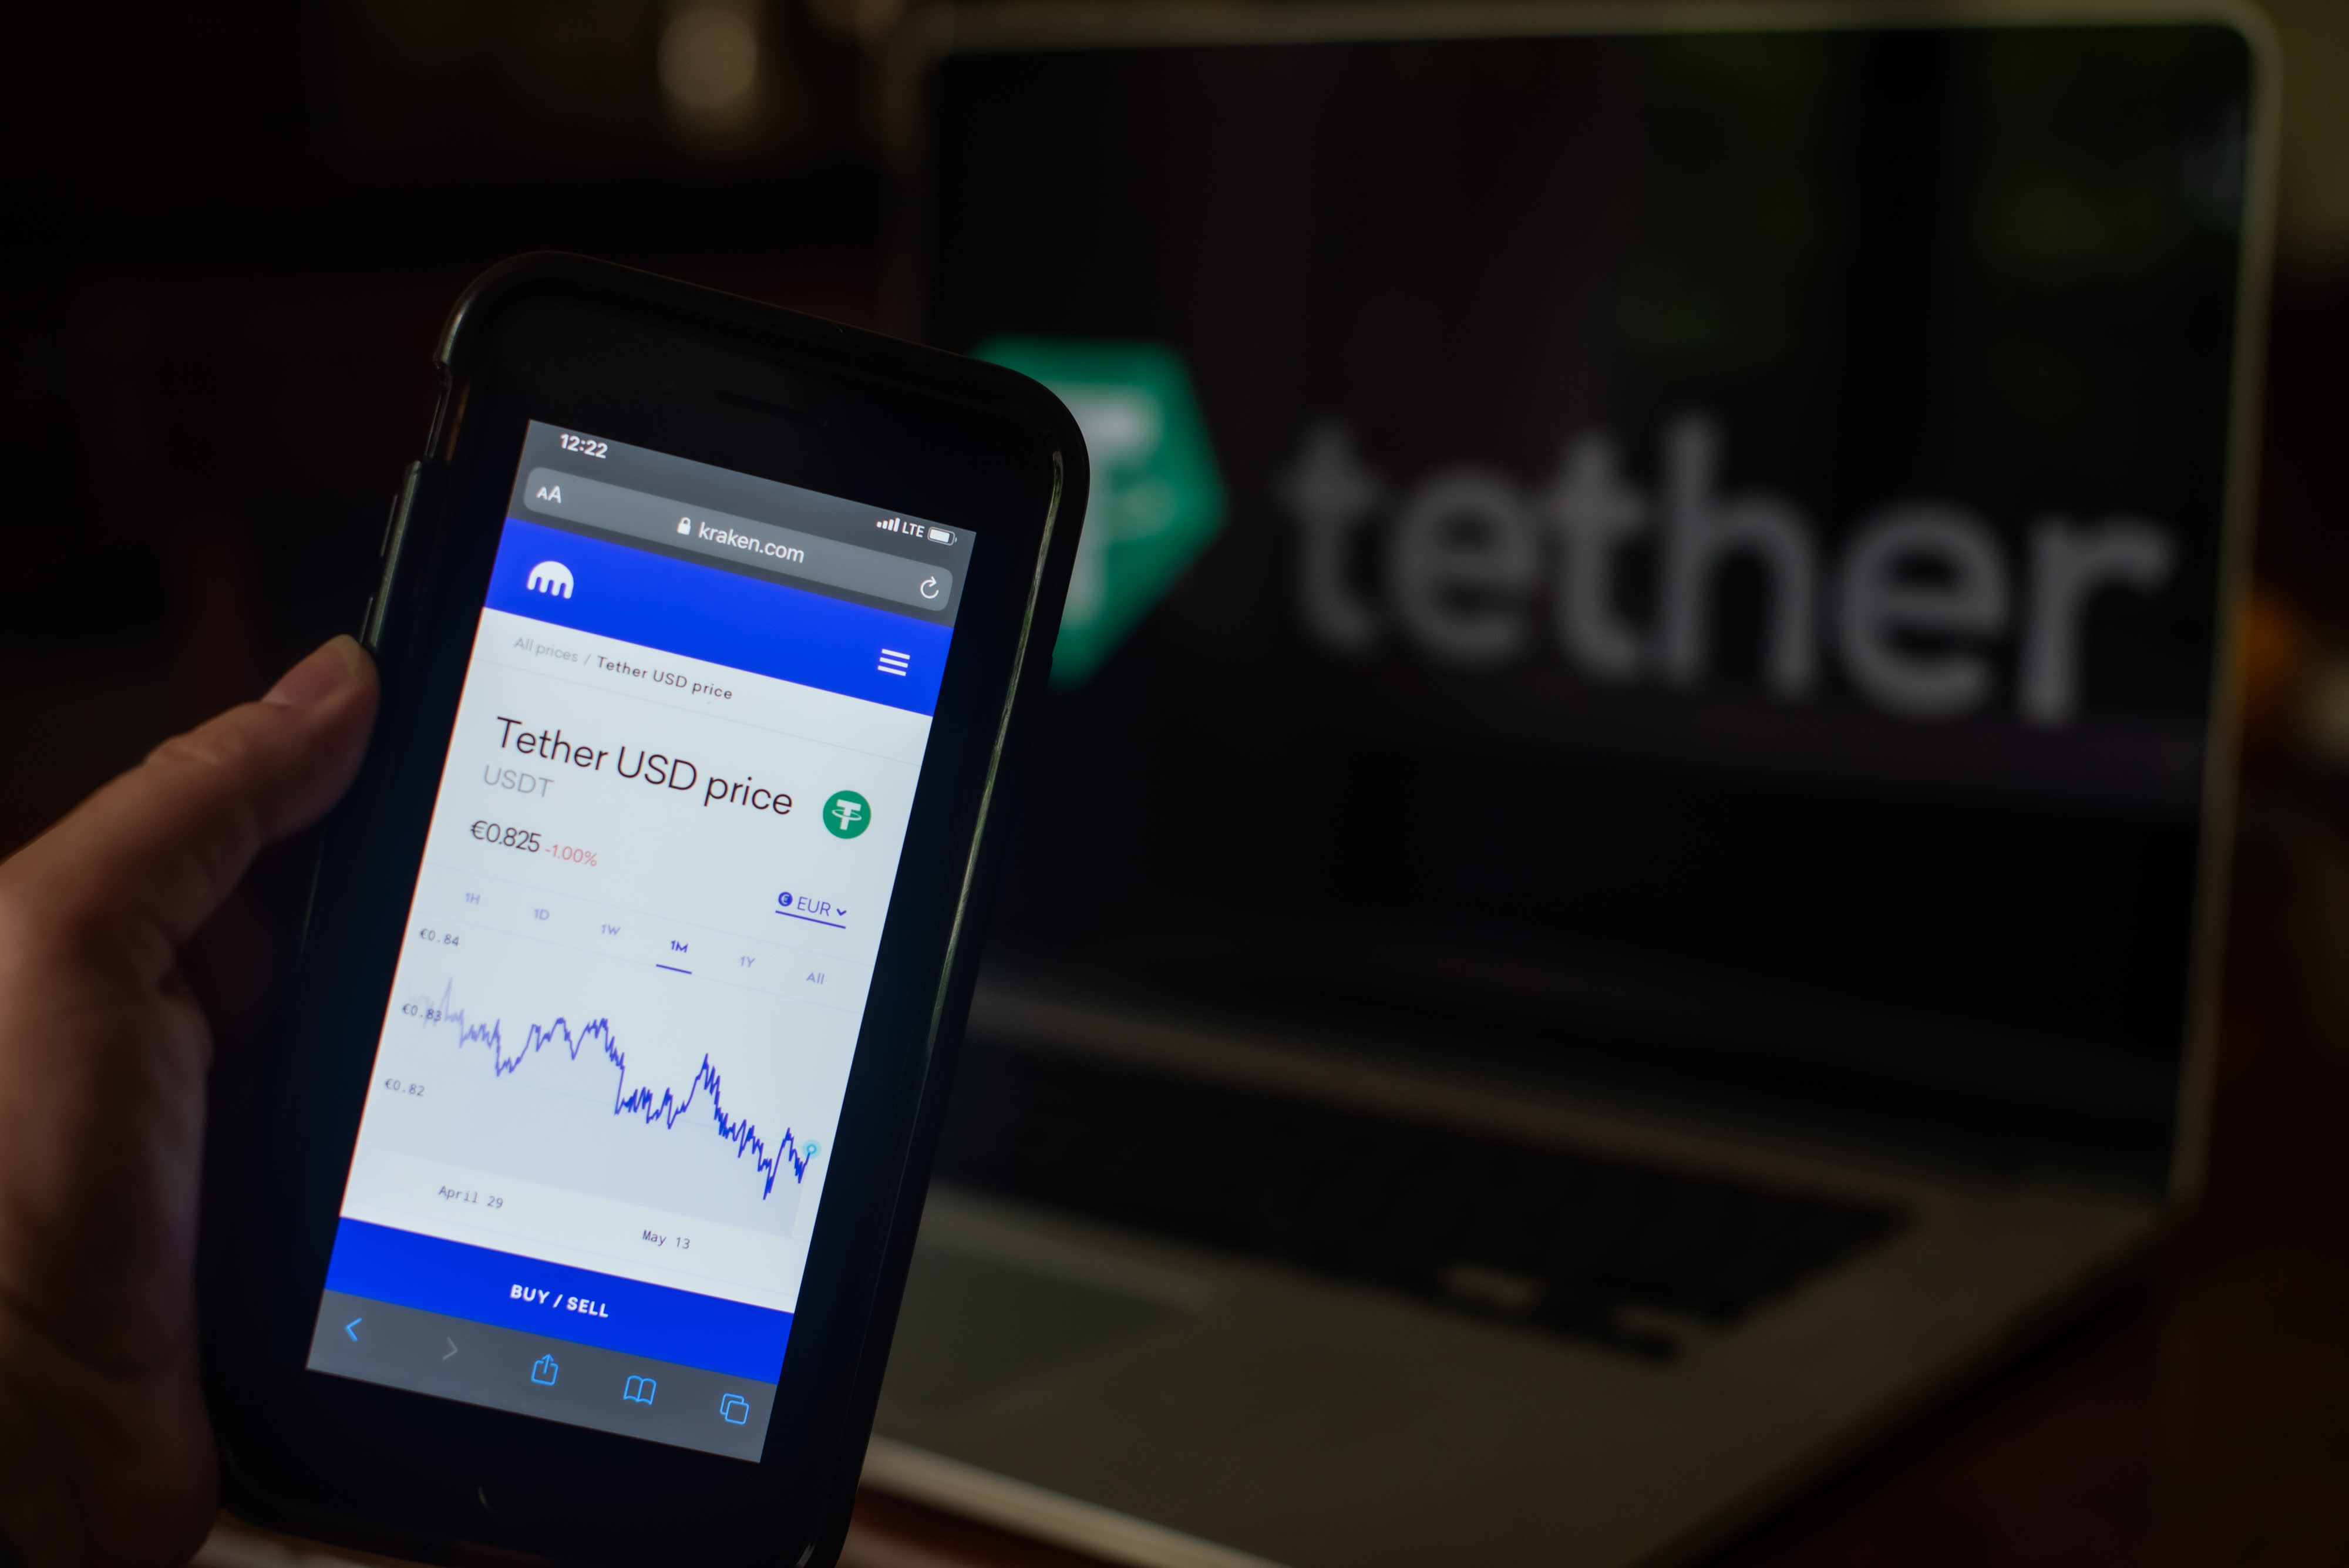 Tether meaning